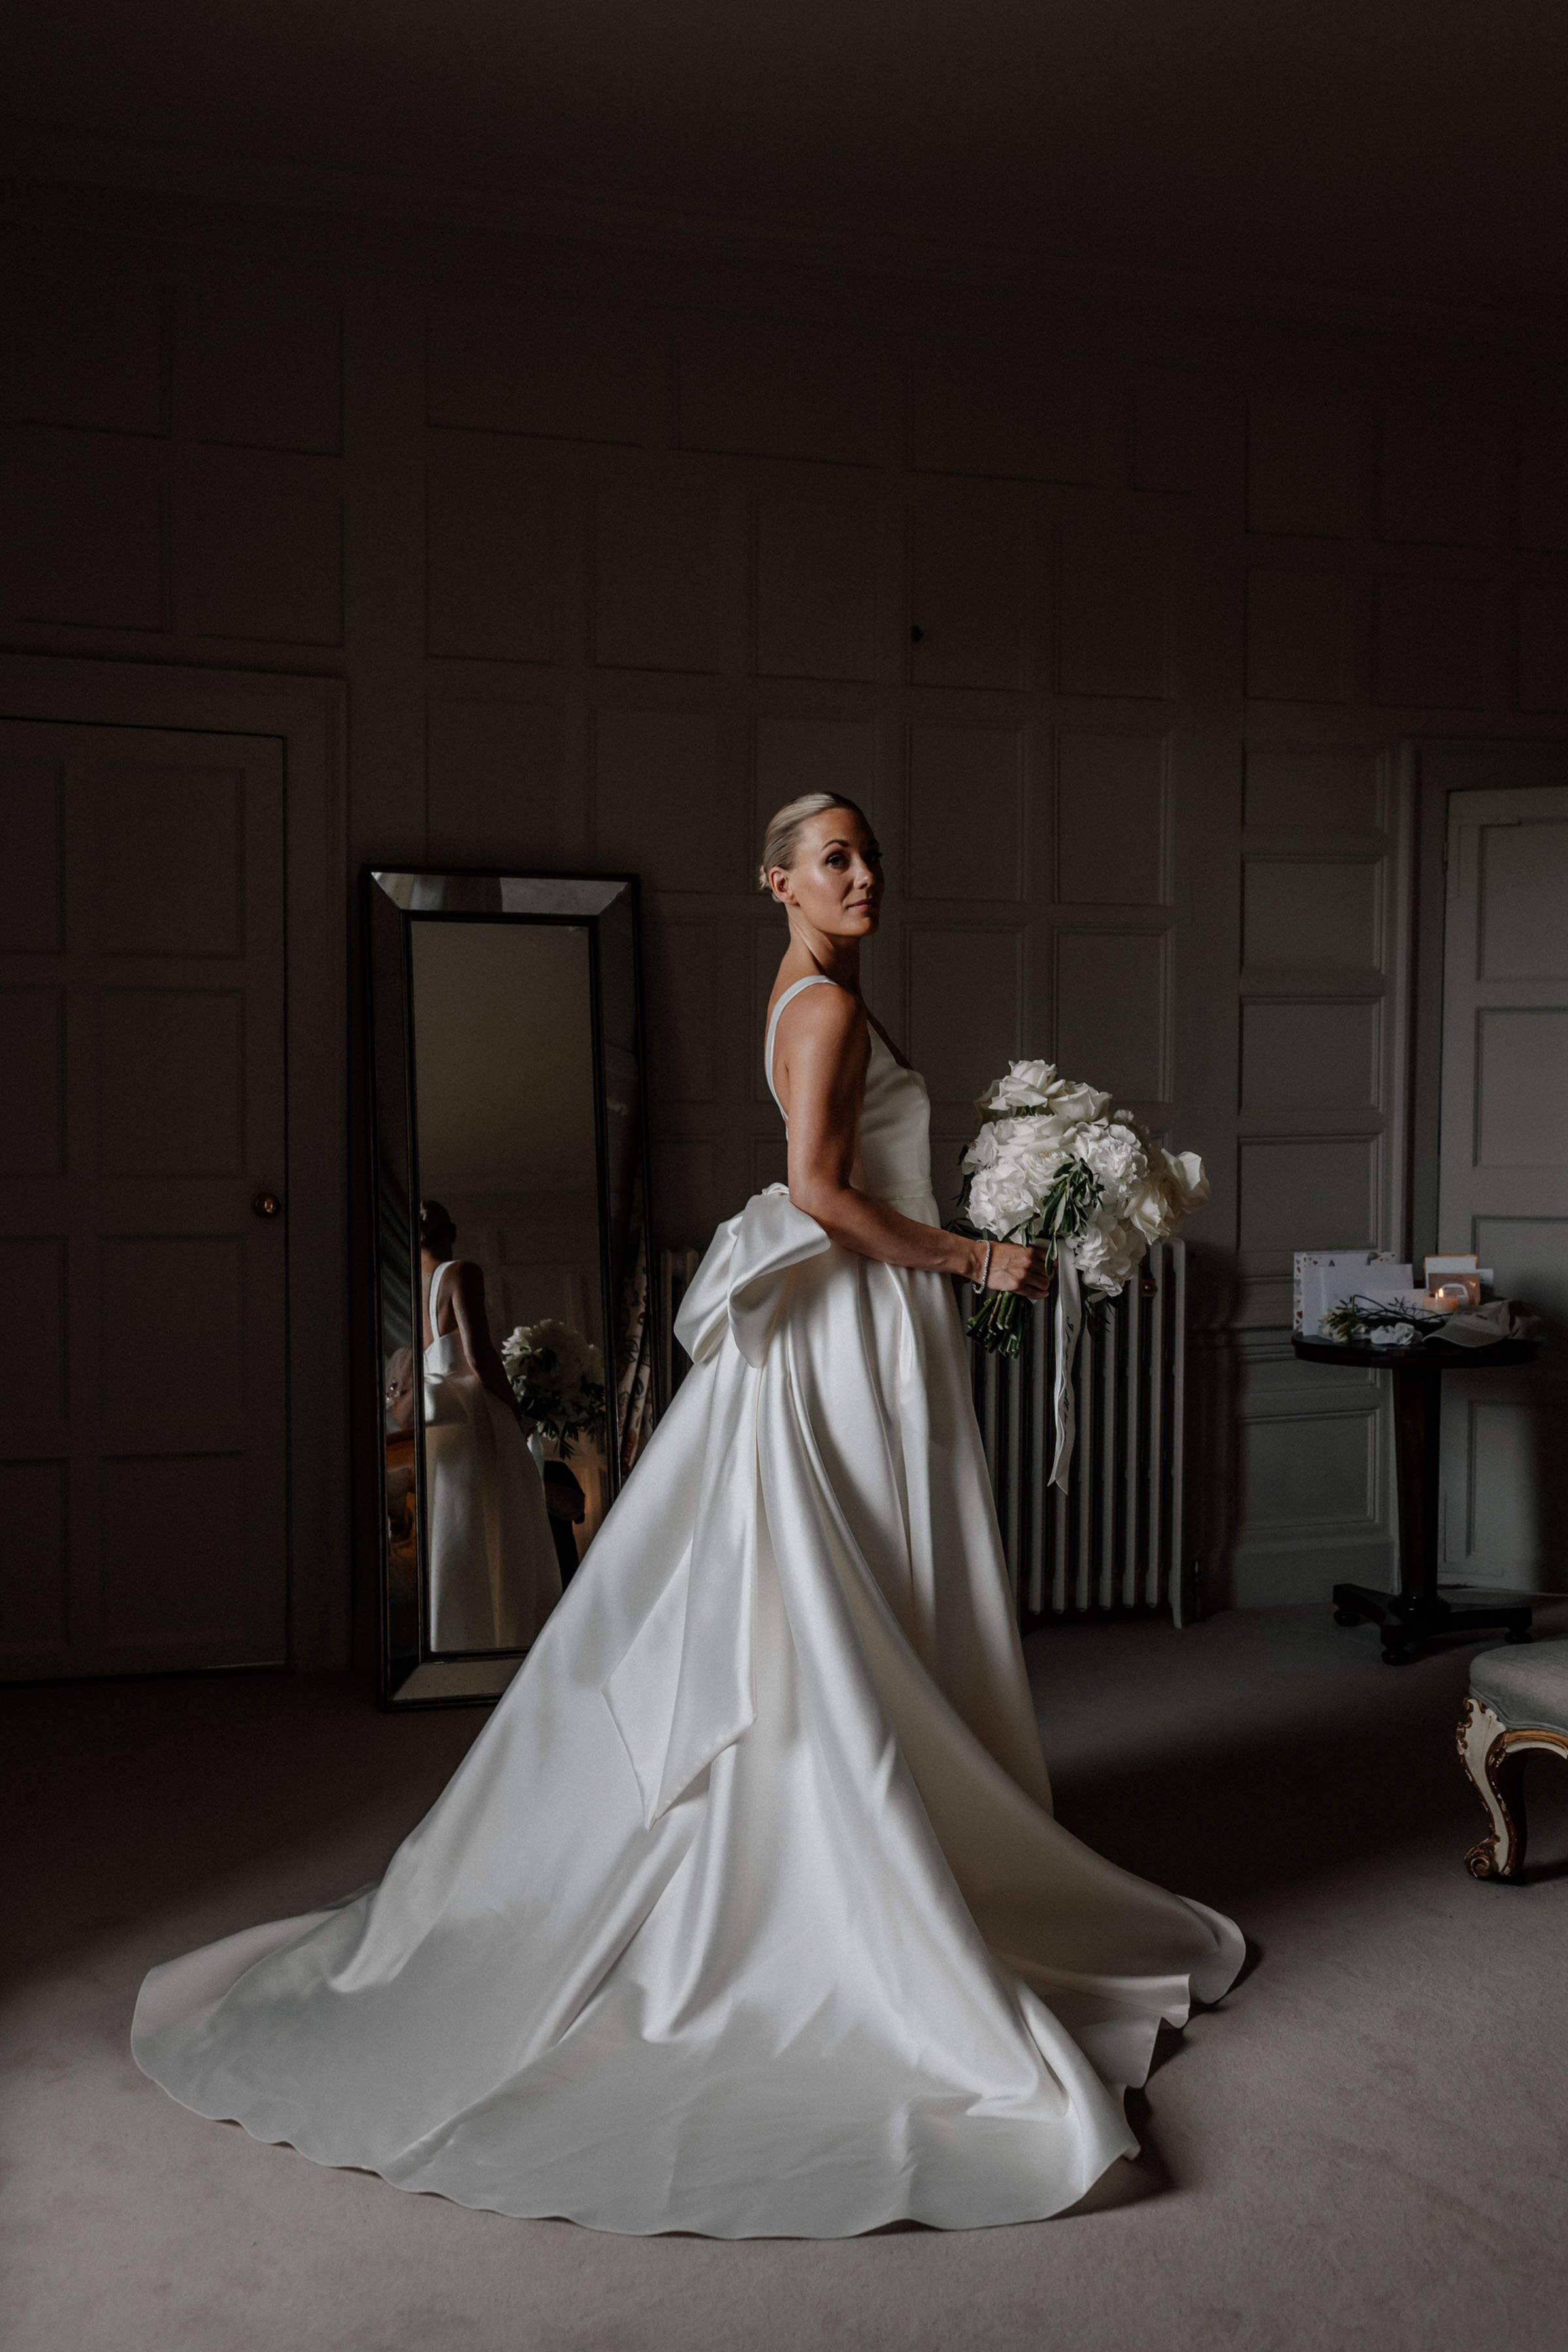 Beautiful bride Danielle wore the Dahlia wedding dress and bow by Halfpenny London